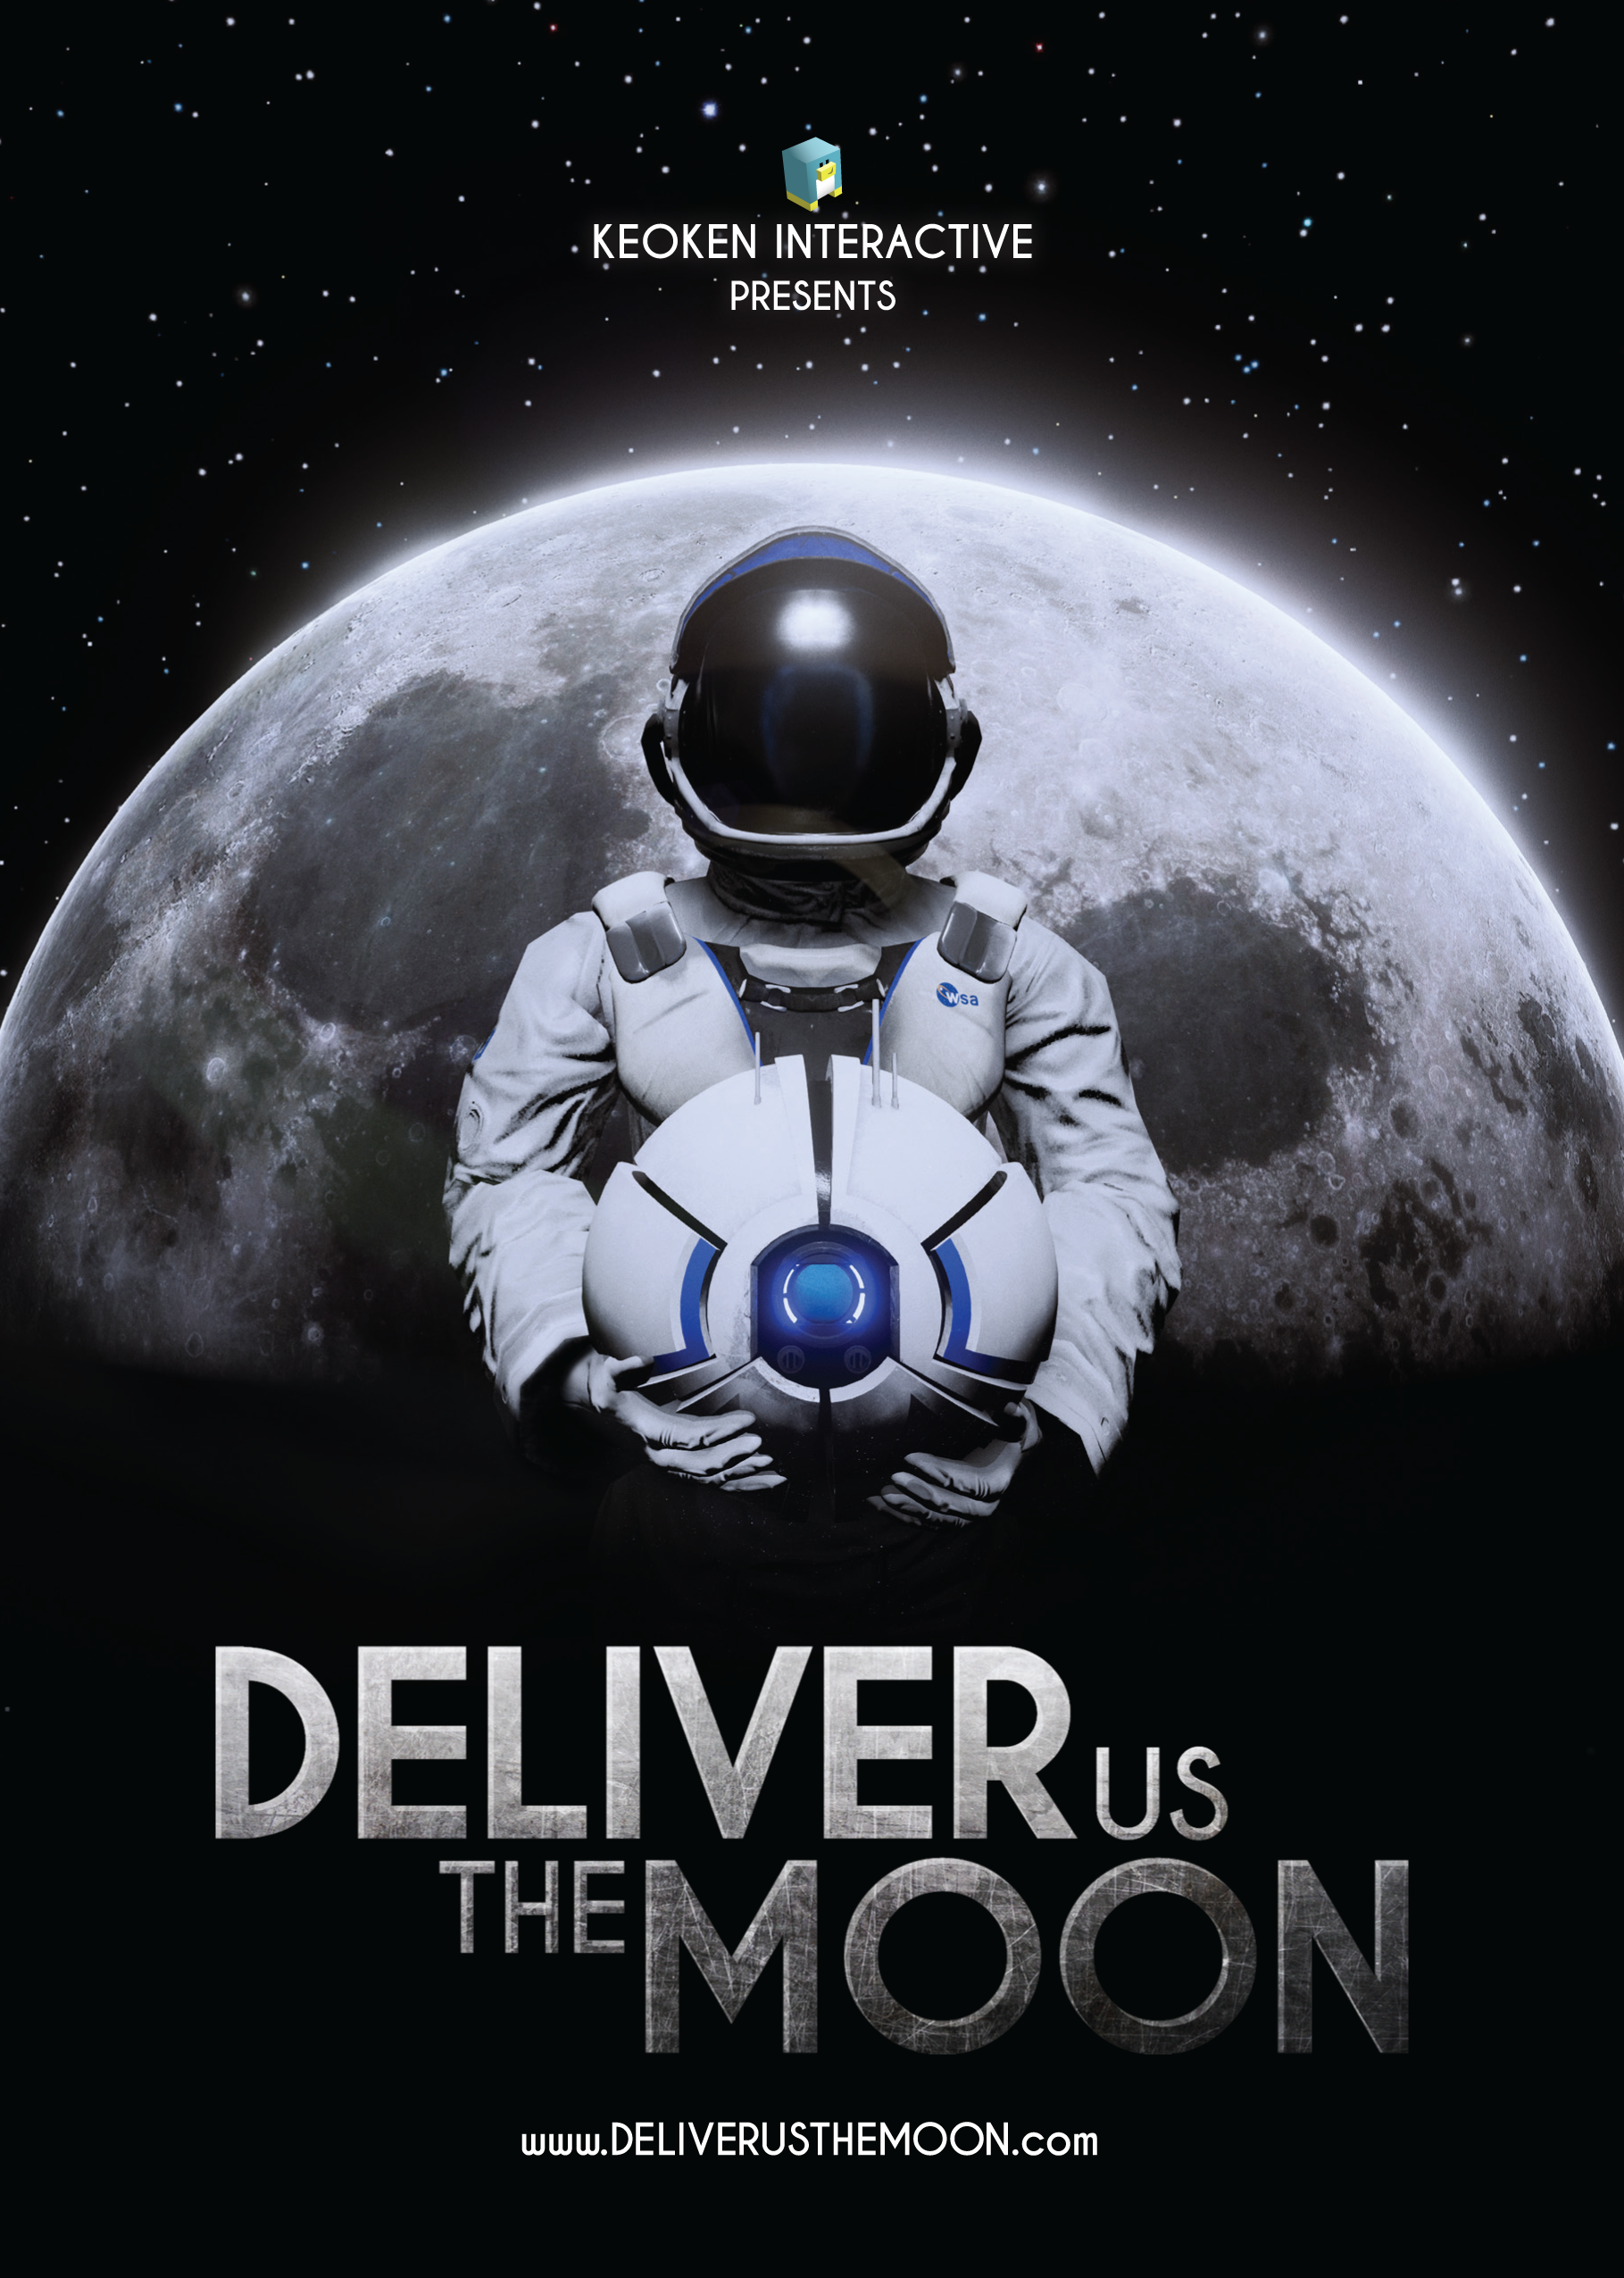 time to beat deliver us the moon